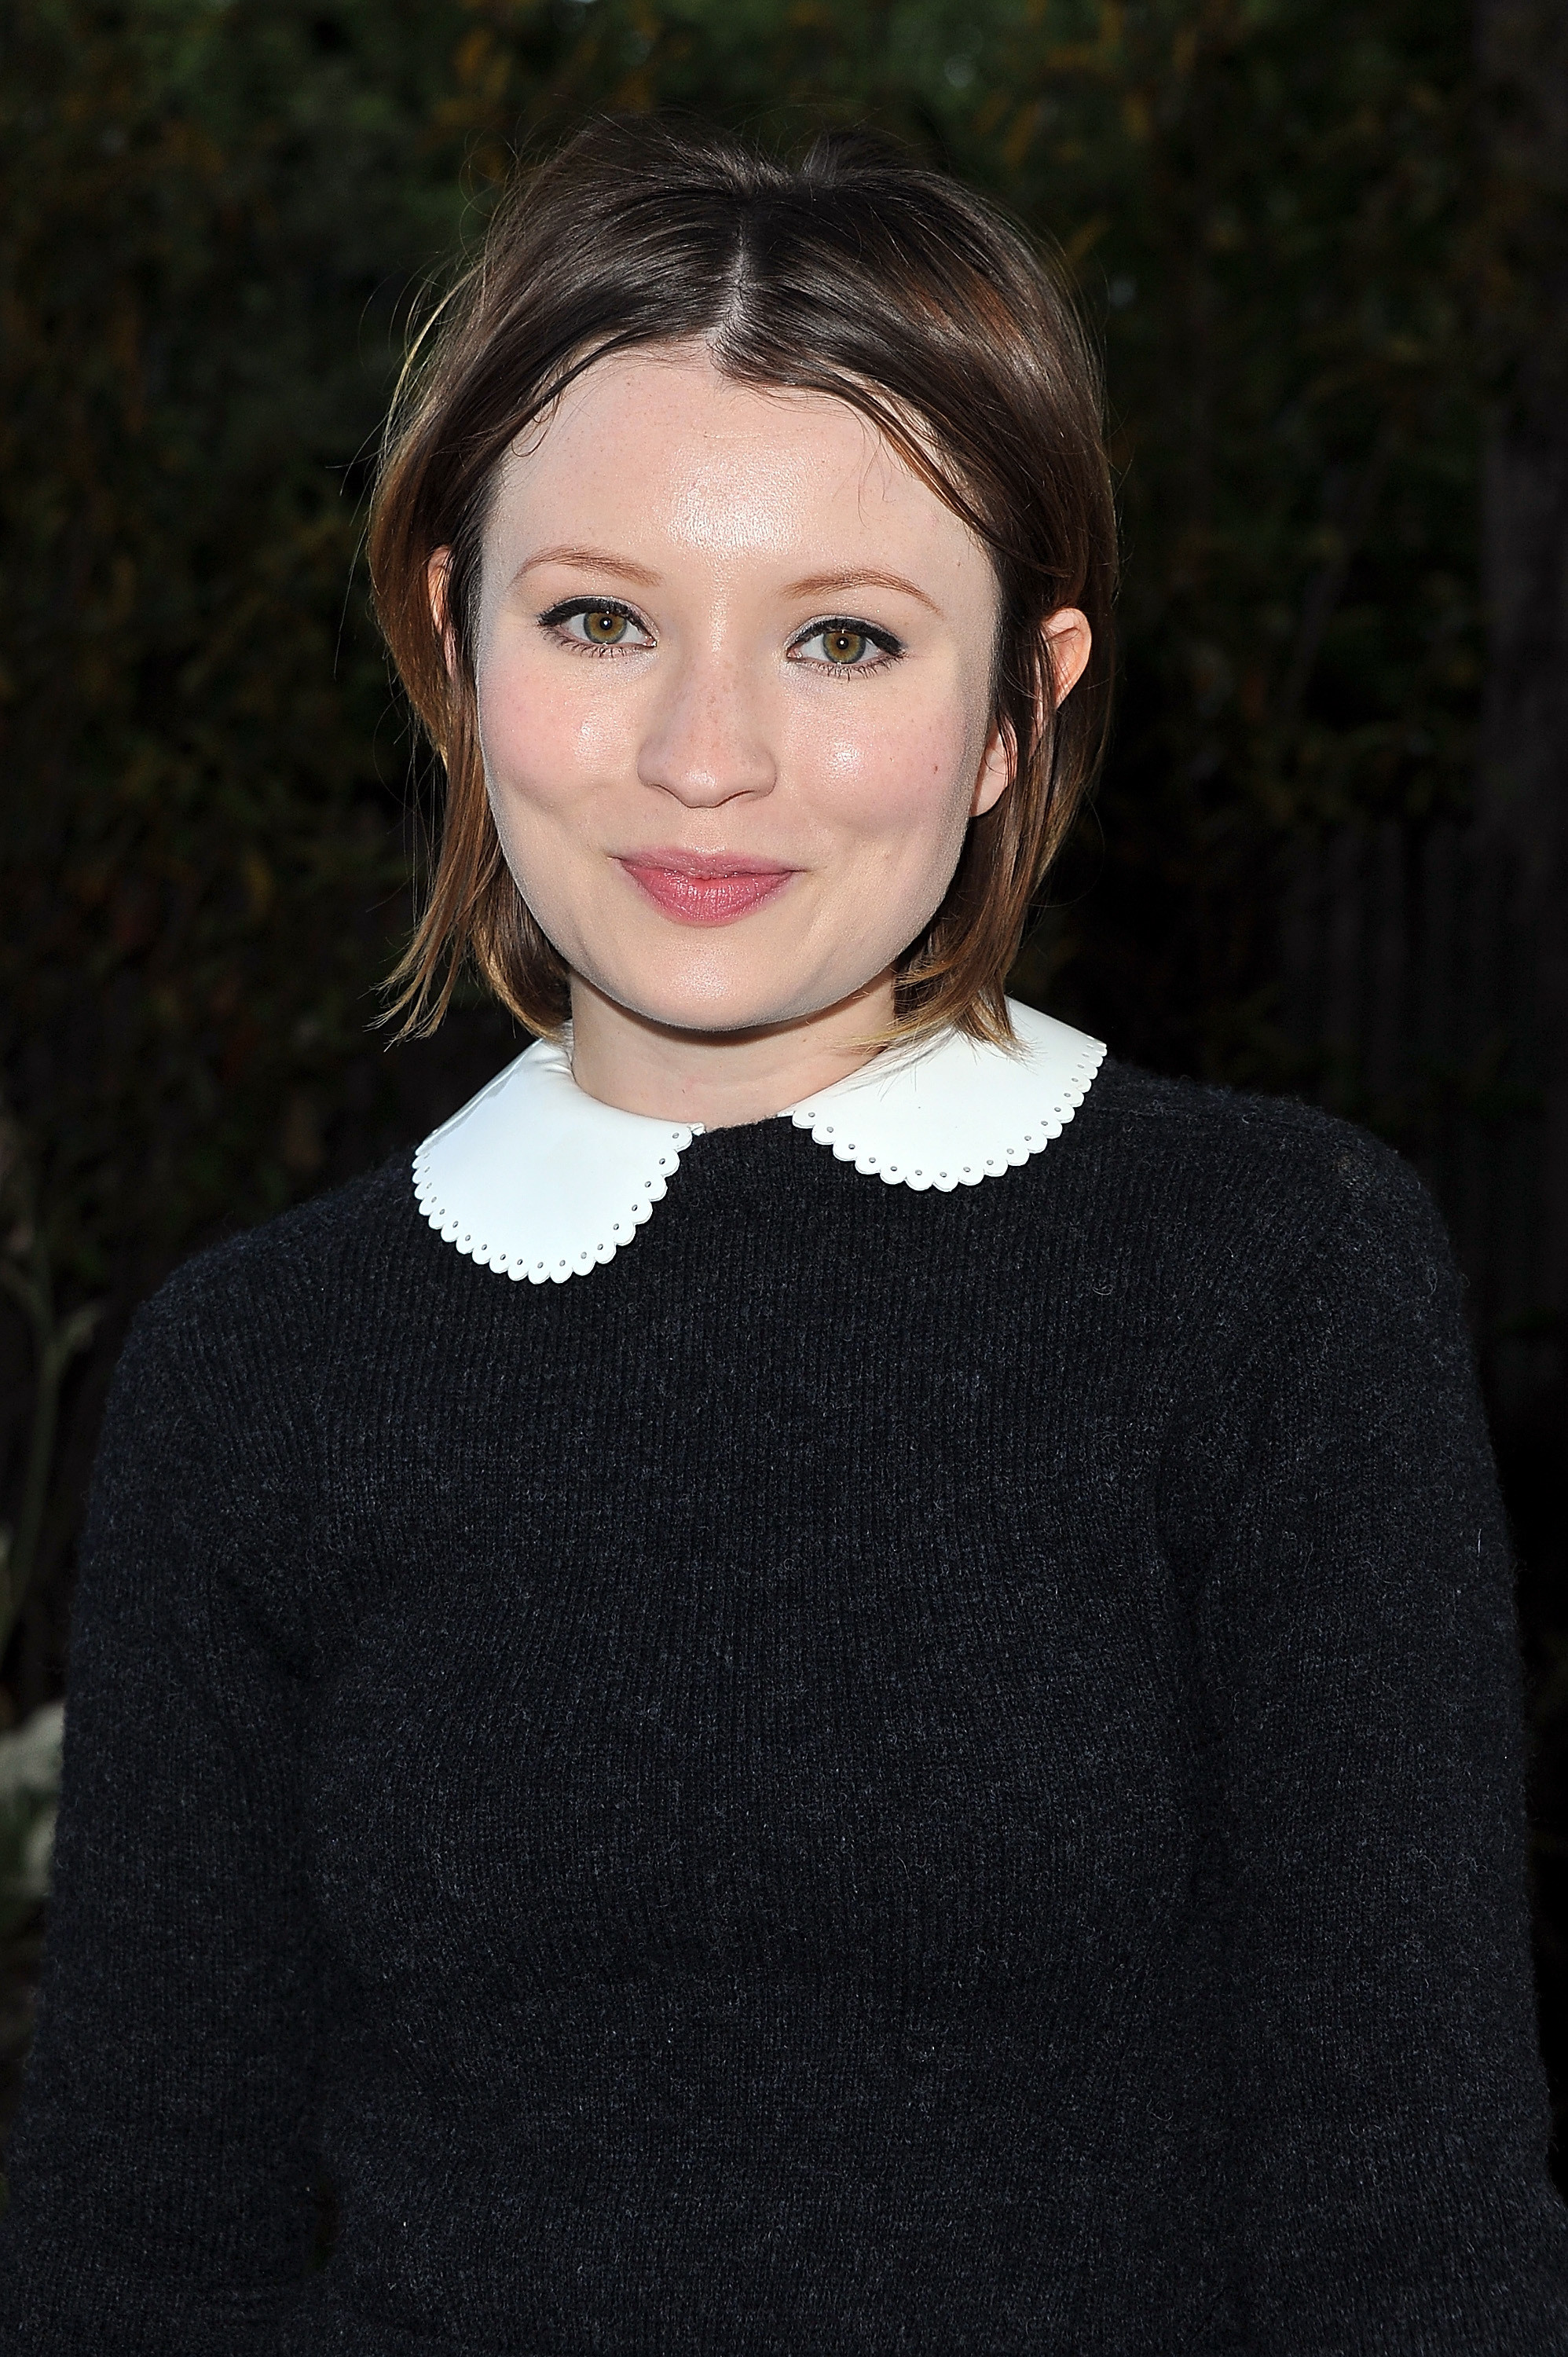 Emily Browning wallpapers, Mobile-friendly designs, Custom backgrounds, Vibrant visuals, 2000x3000 HD Handy